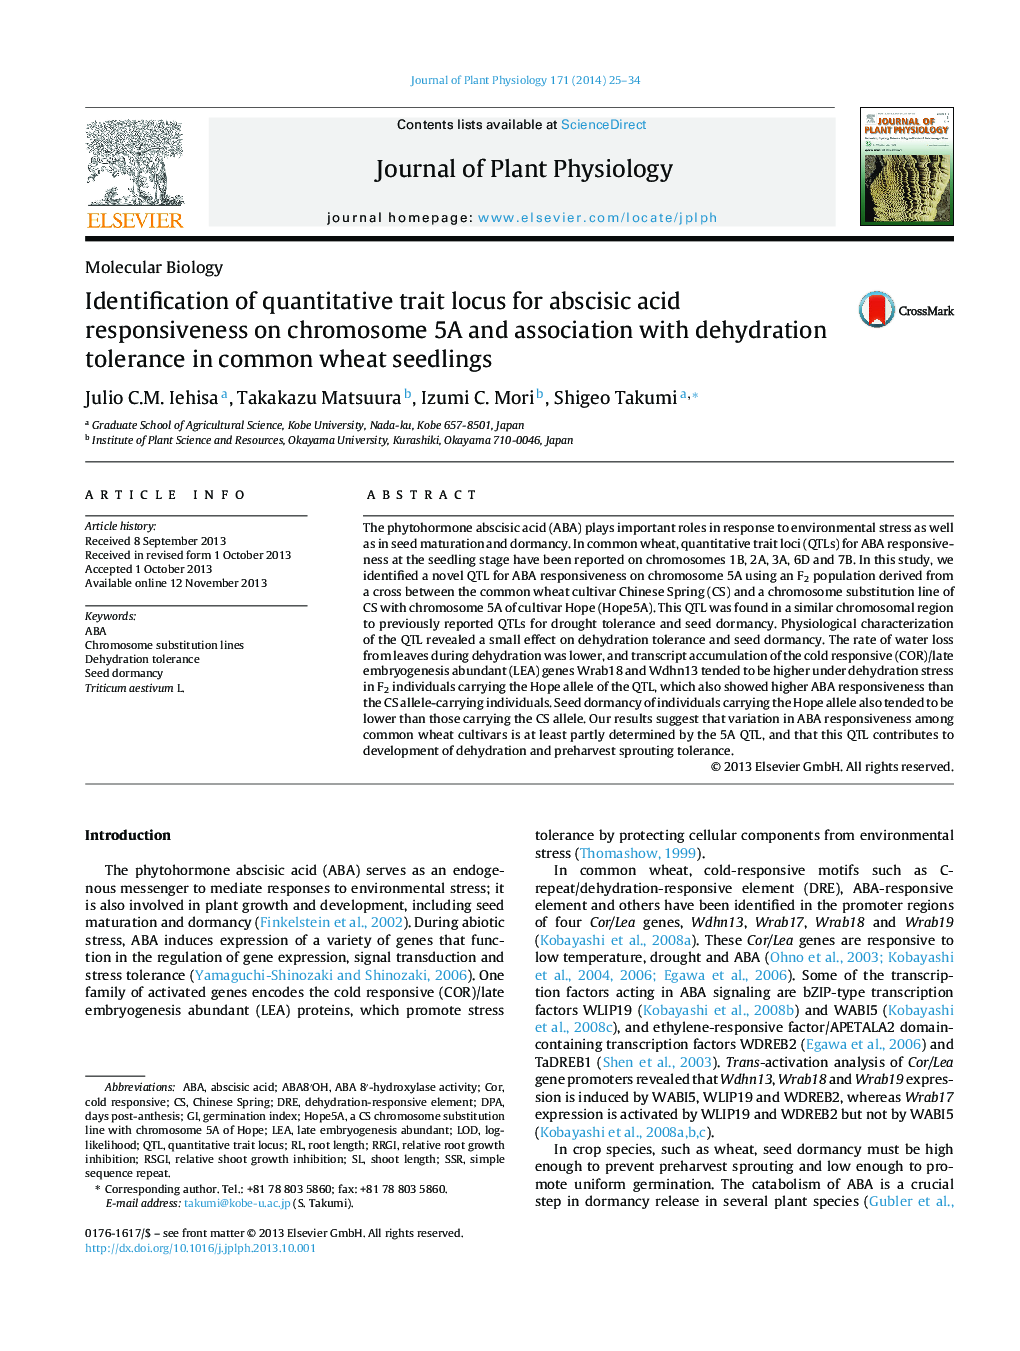 Identification of quantitative trait locus for abscisic acid responsiveness on chromosome 5A and association with dehydration tolerance in common wheat seedlings